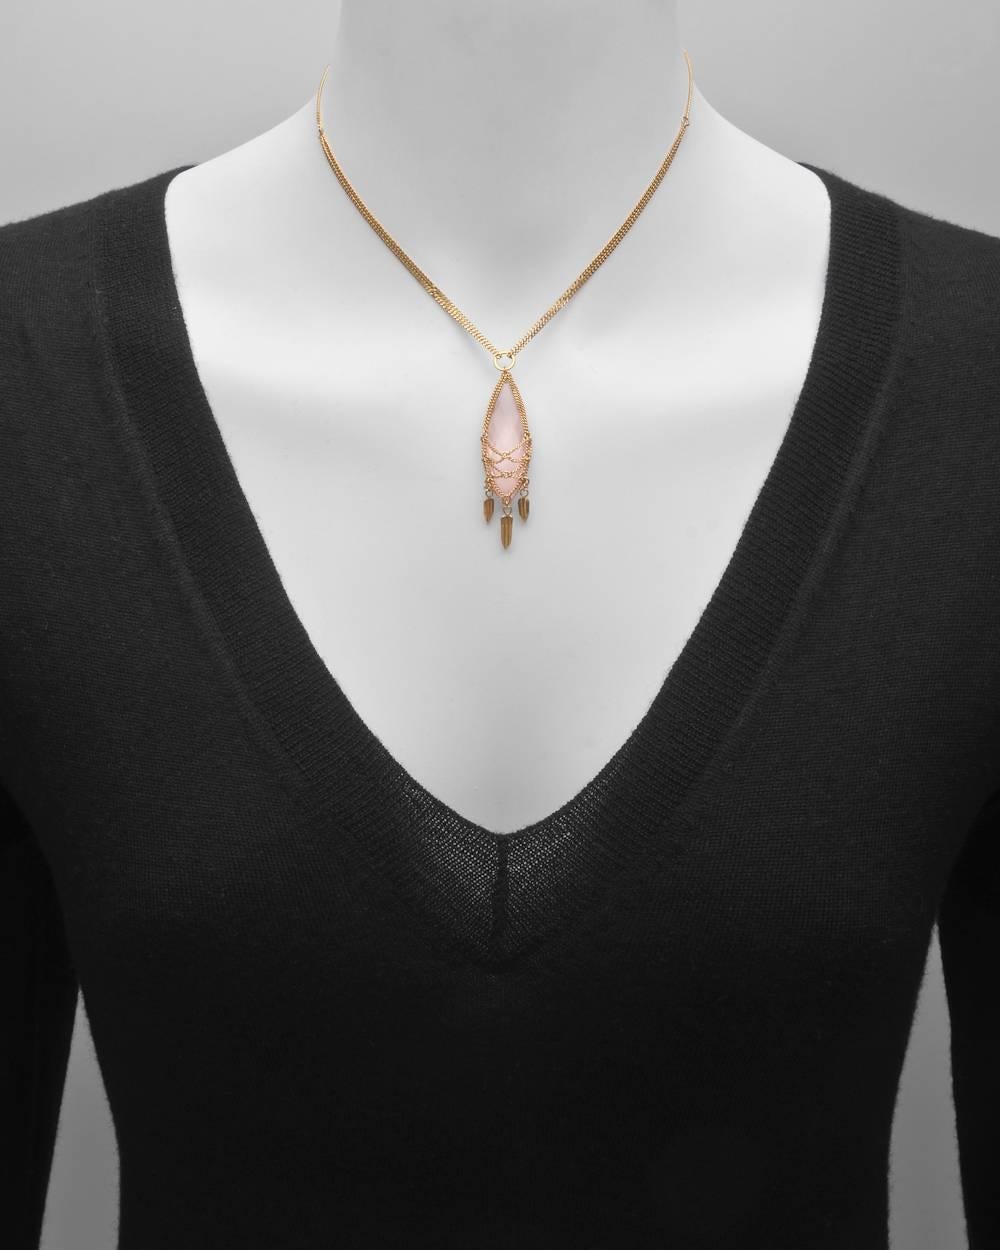 Rose quartz pendant necklace in a handcrafted, 18k yellow gold wire setting, suspending gold drops. On a handmade chain necklace in 18k yellow gold that adjusts from 15